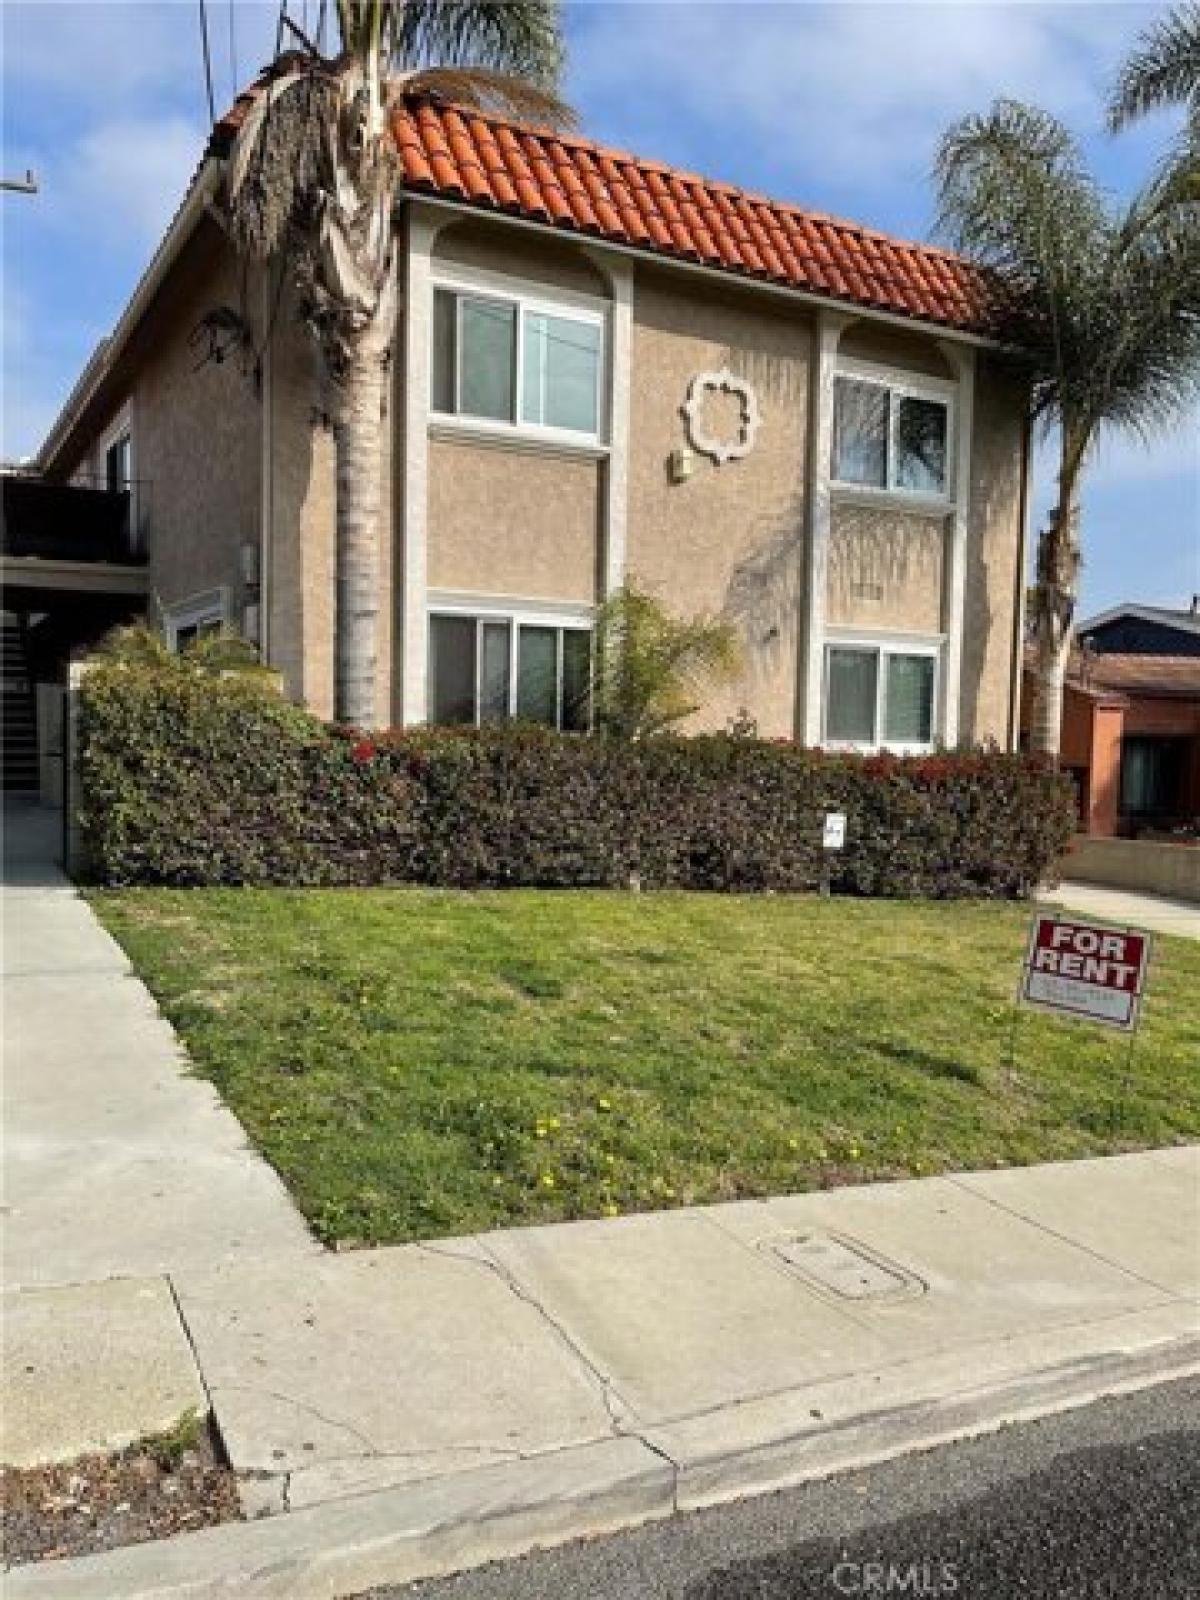 Picture of Apartment For Rent in Redondo Beach, California, United States